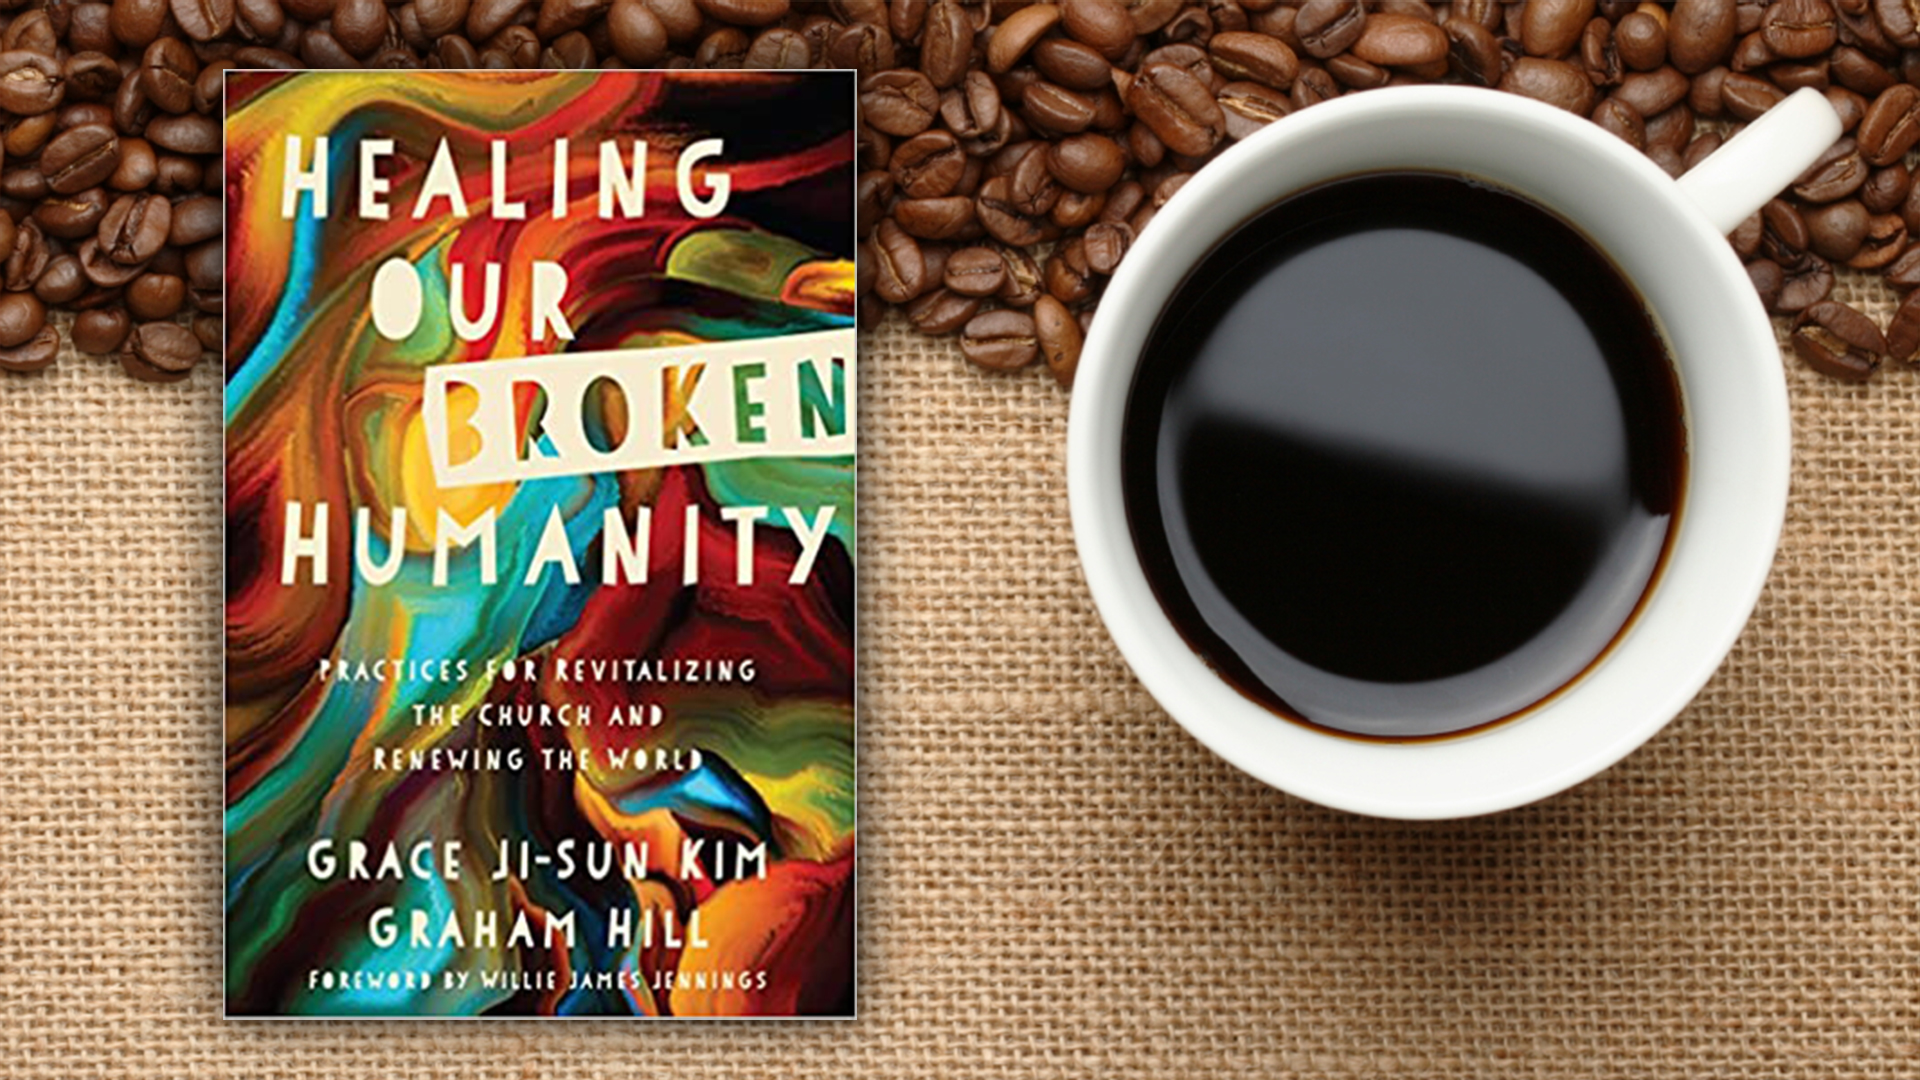 Theology, Thoughts & Coffee
Sundays, 8 a.m., Zoom
Book Study: Healing Our Broken
Humanity: Practices for Revitalizing the Church and Renewing
the World by Grace Ji-Sun Kim and Graham Hill
